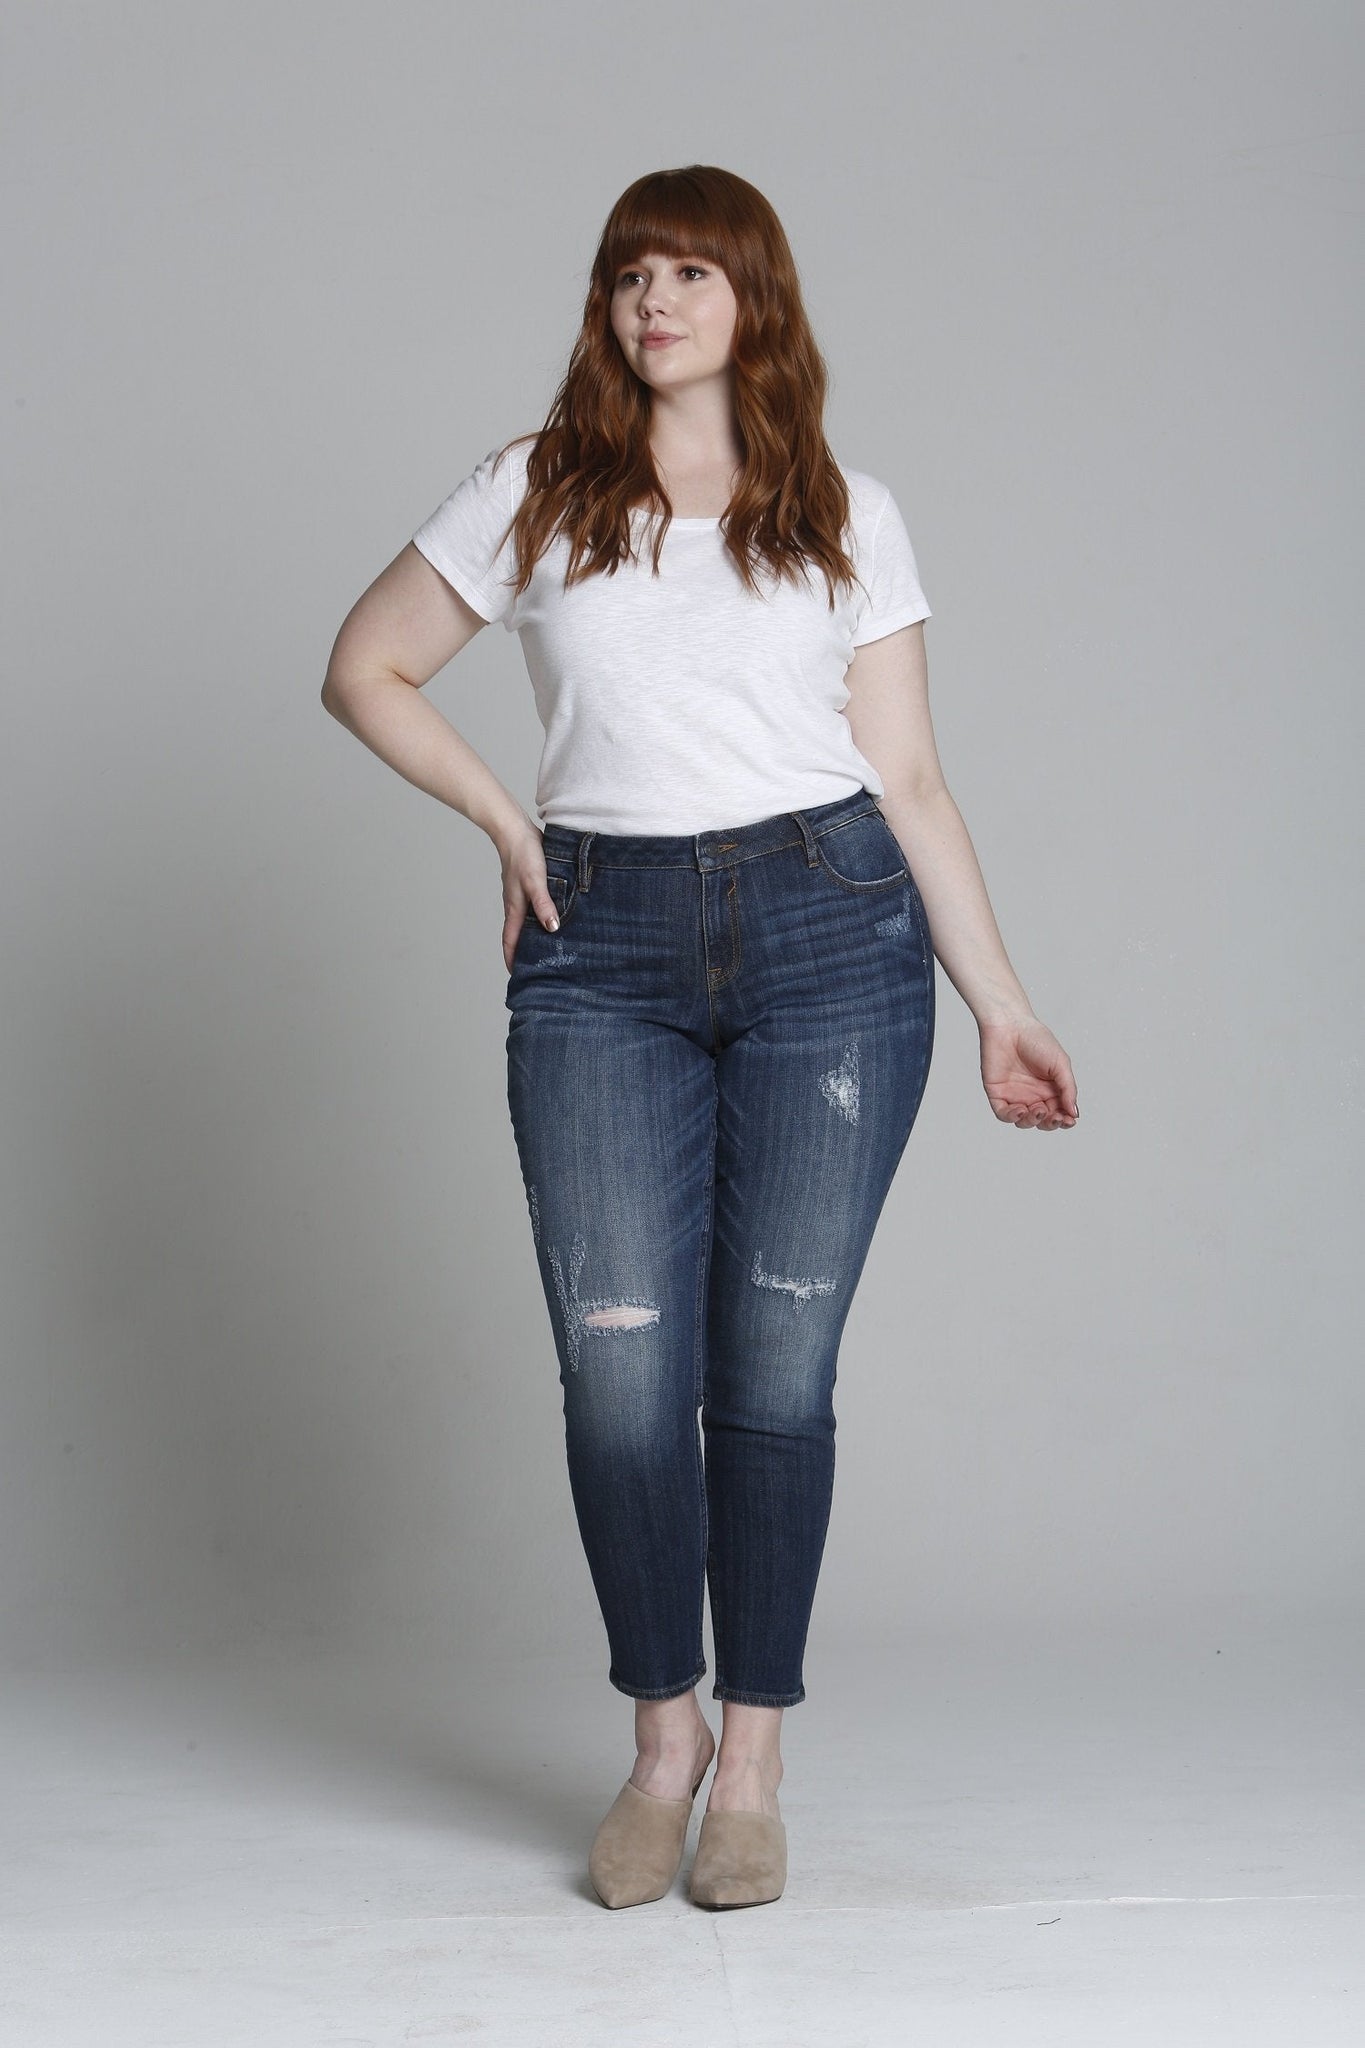 Load image into Gallery viewer, Jagger Authentic Skinny [Plus Size] - Dark
